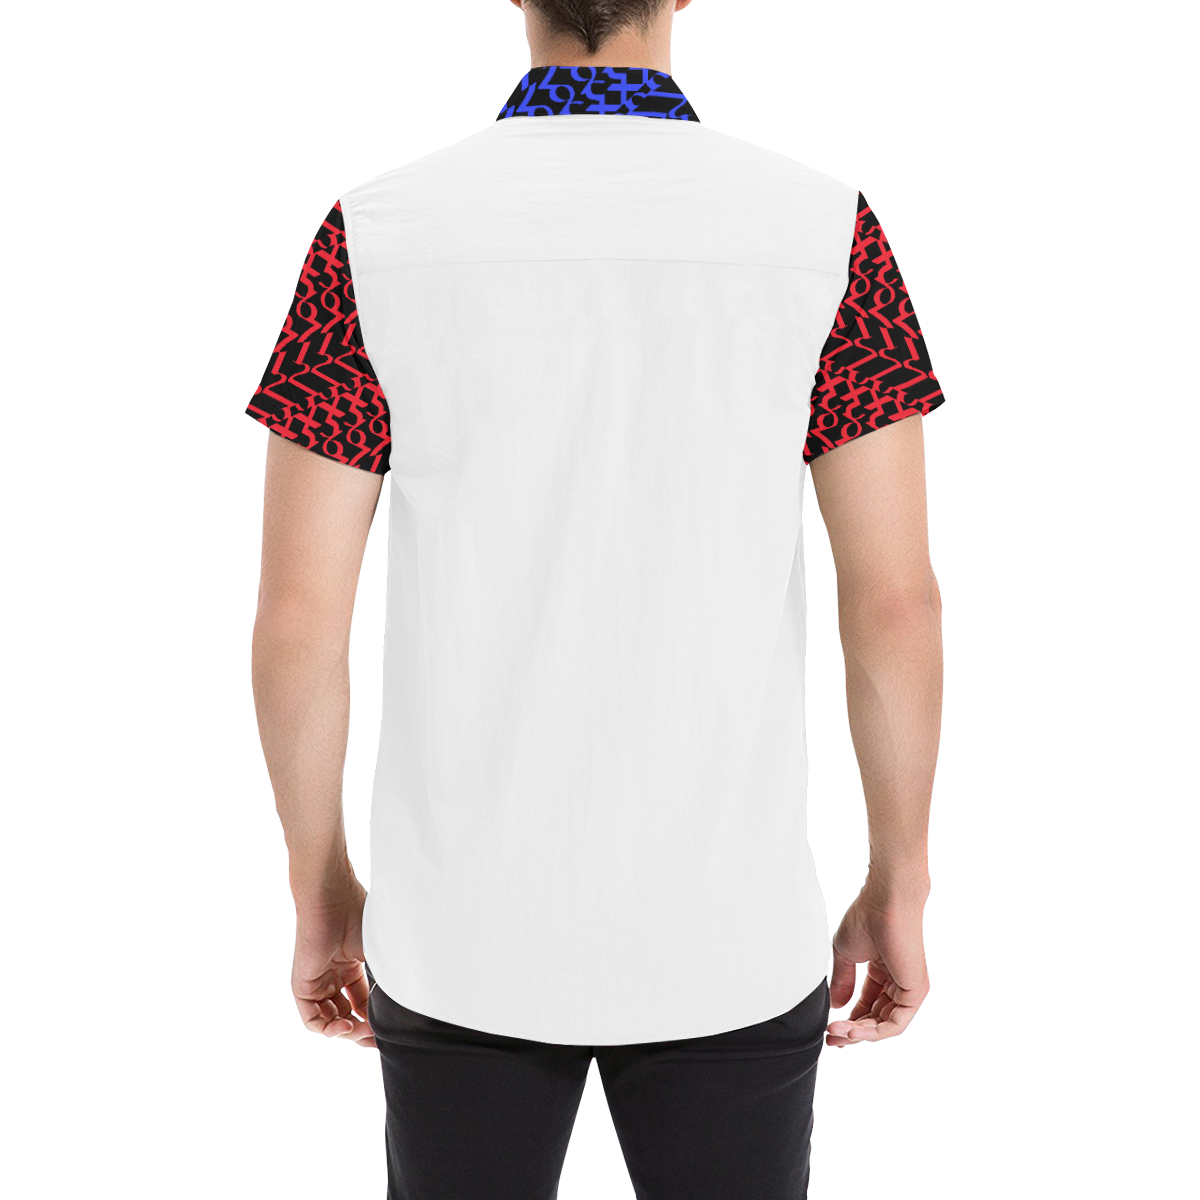 NUMBERS Collection 1234567 "Reverse" White Split collar/sleeves Men's All Over Print Short Sleeve Shirt (Model T53)